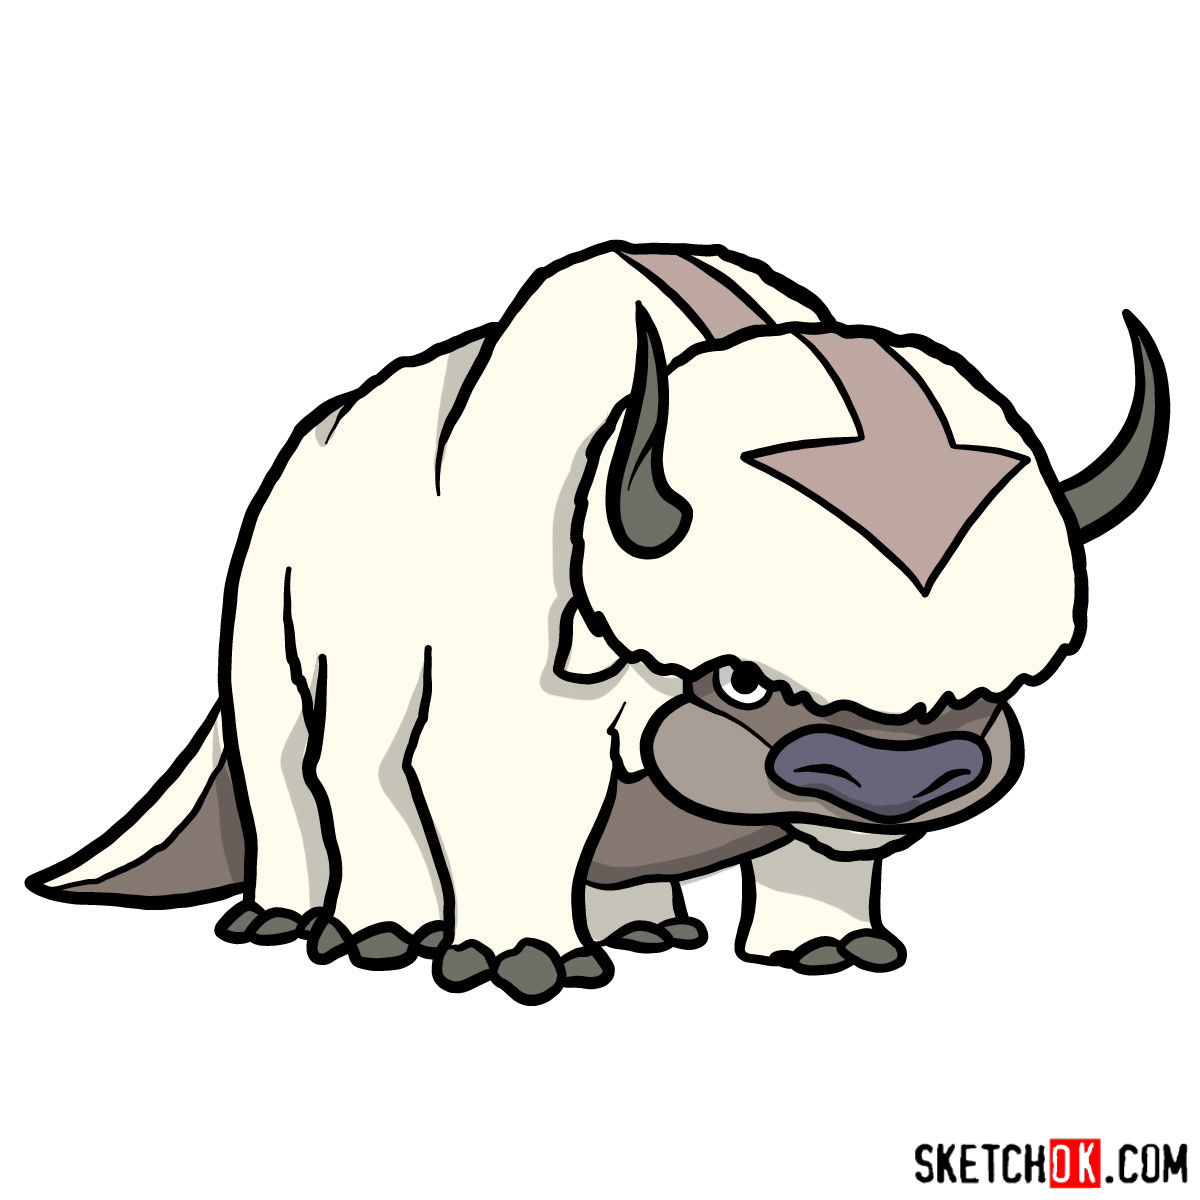 How to draw Appa, a bison from Avatar - Sketchok easy drawing guides